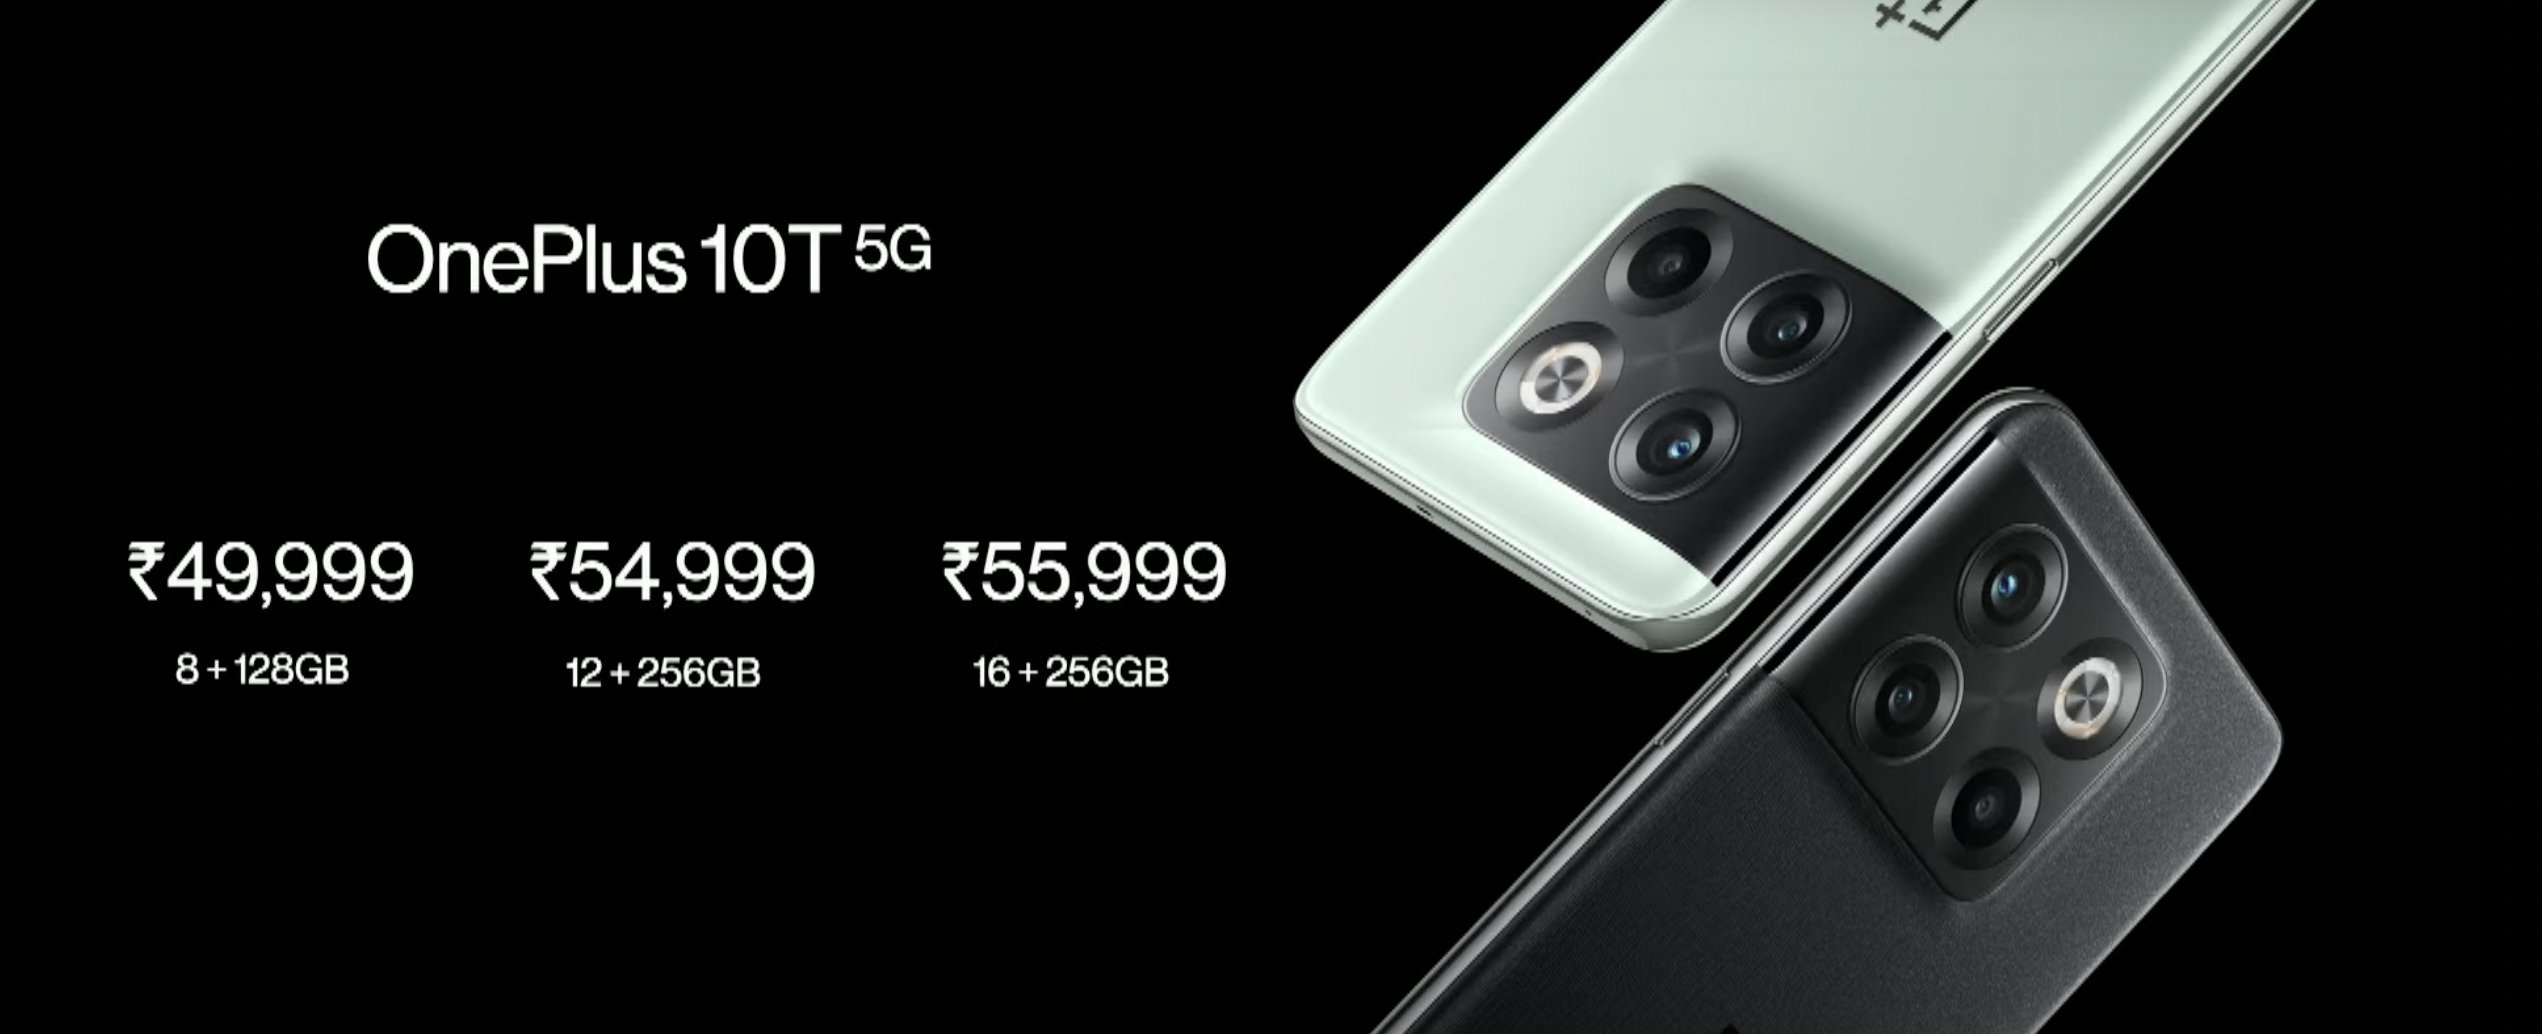 OnePlus 10T 5G Launched in India, Price Starts At Rs 49,999 - Engineers Corner